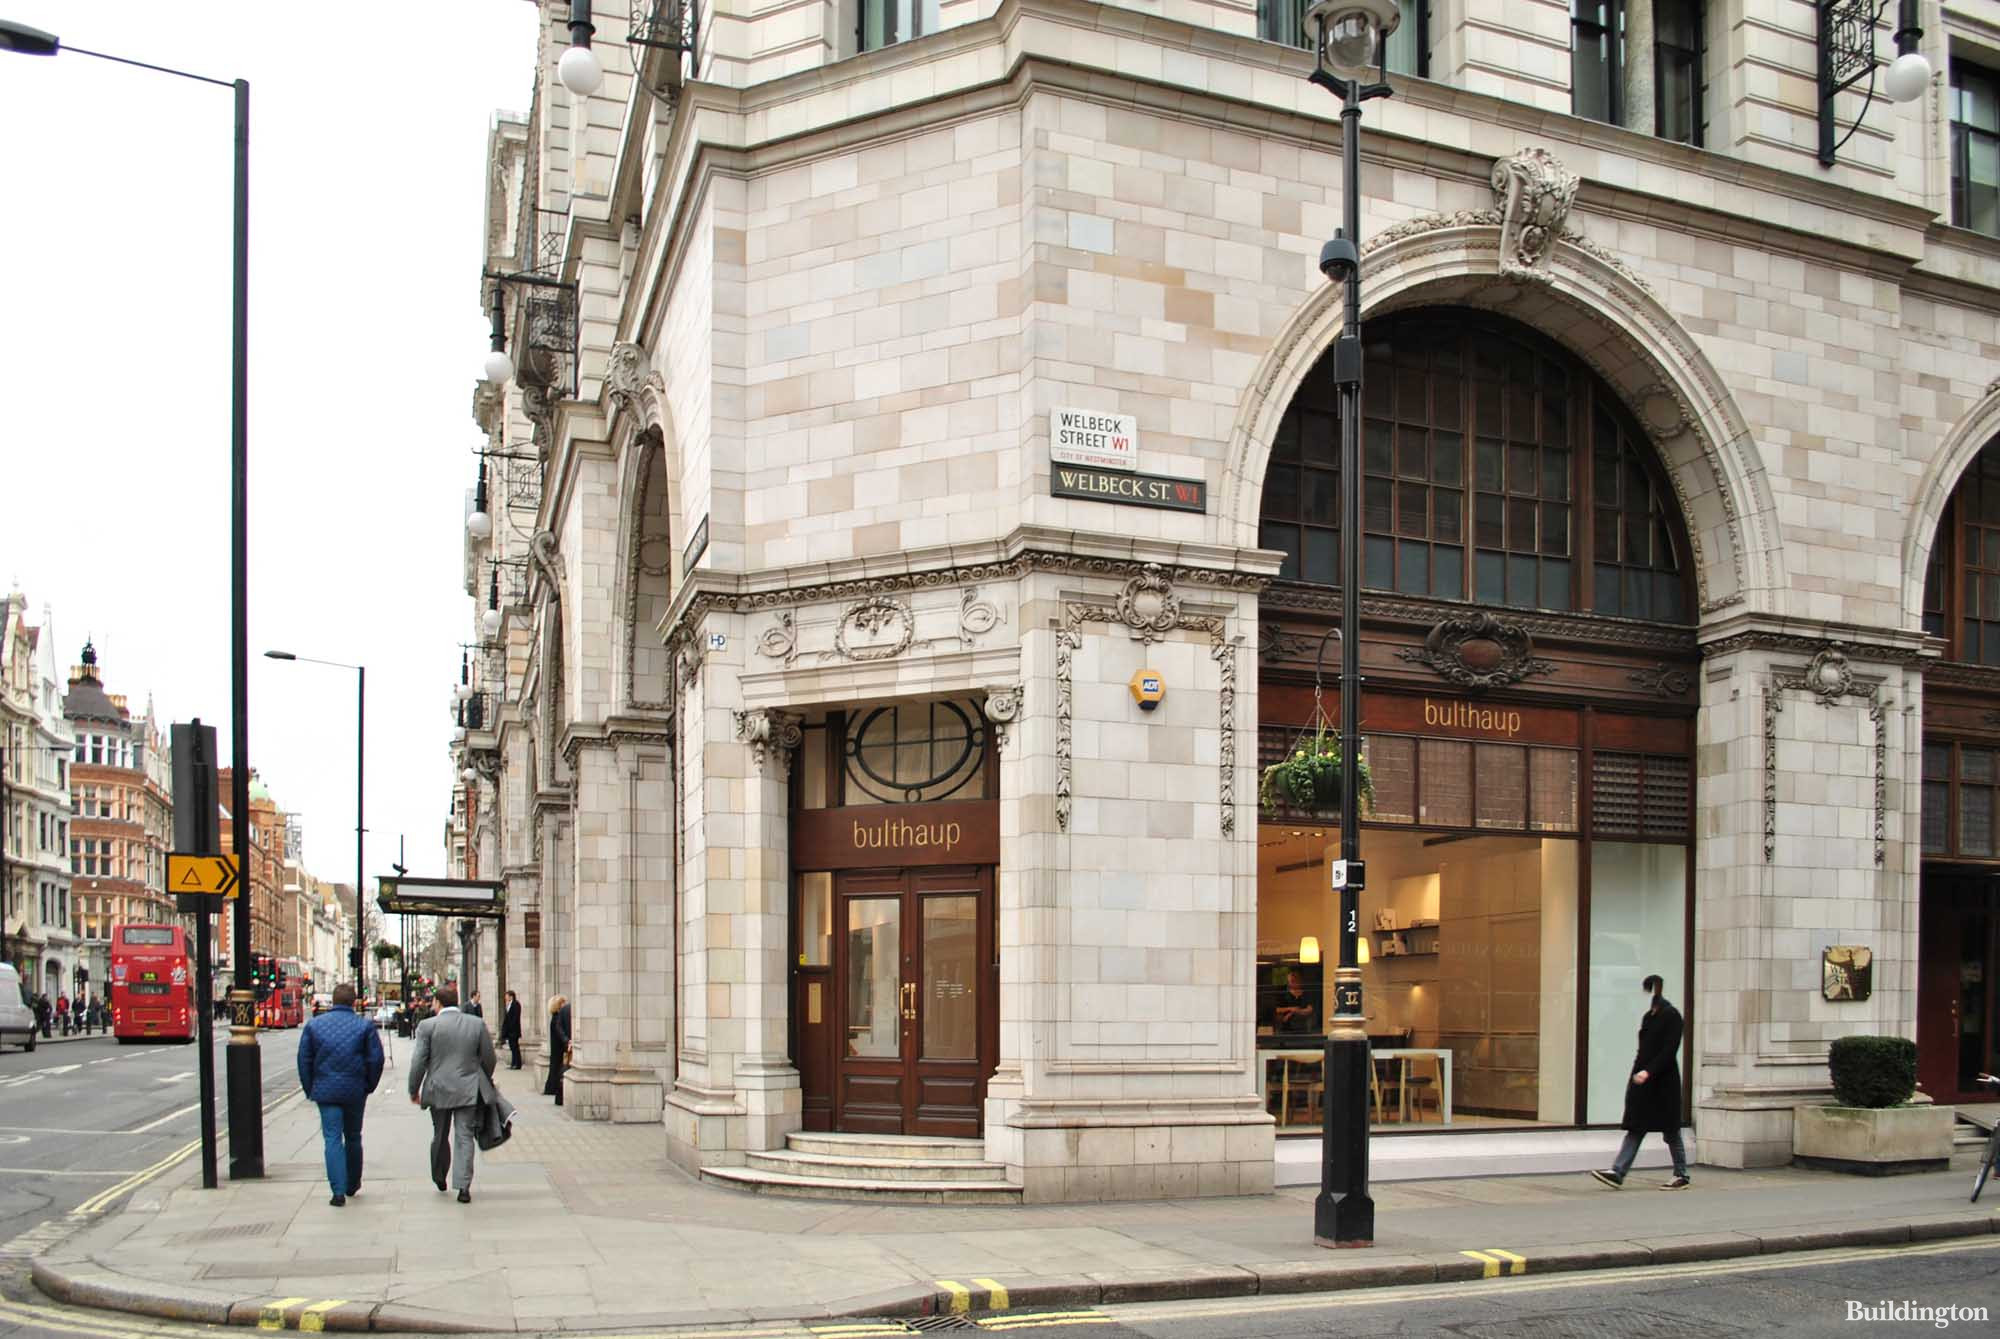 Bulthaup store at 33 Wigmore Street building on Welbeck Street in Marylebone, London W1.